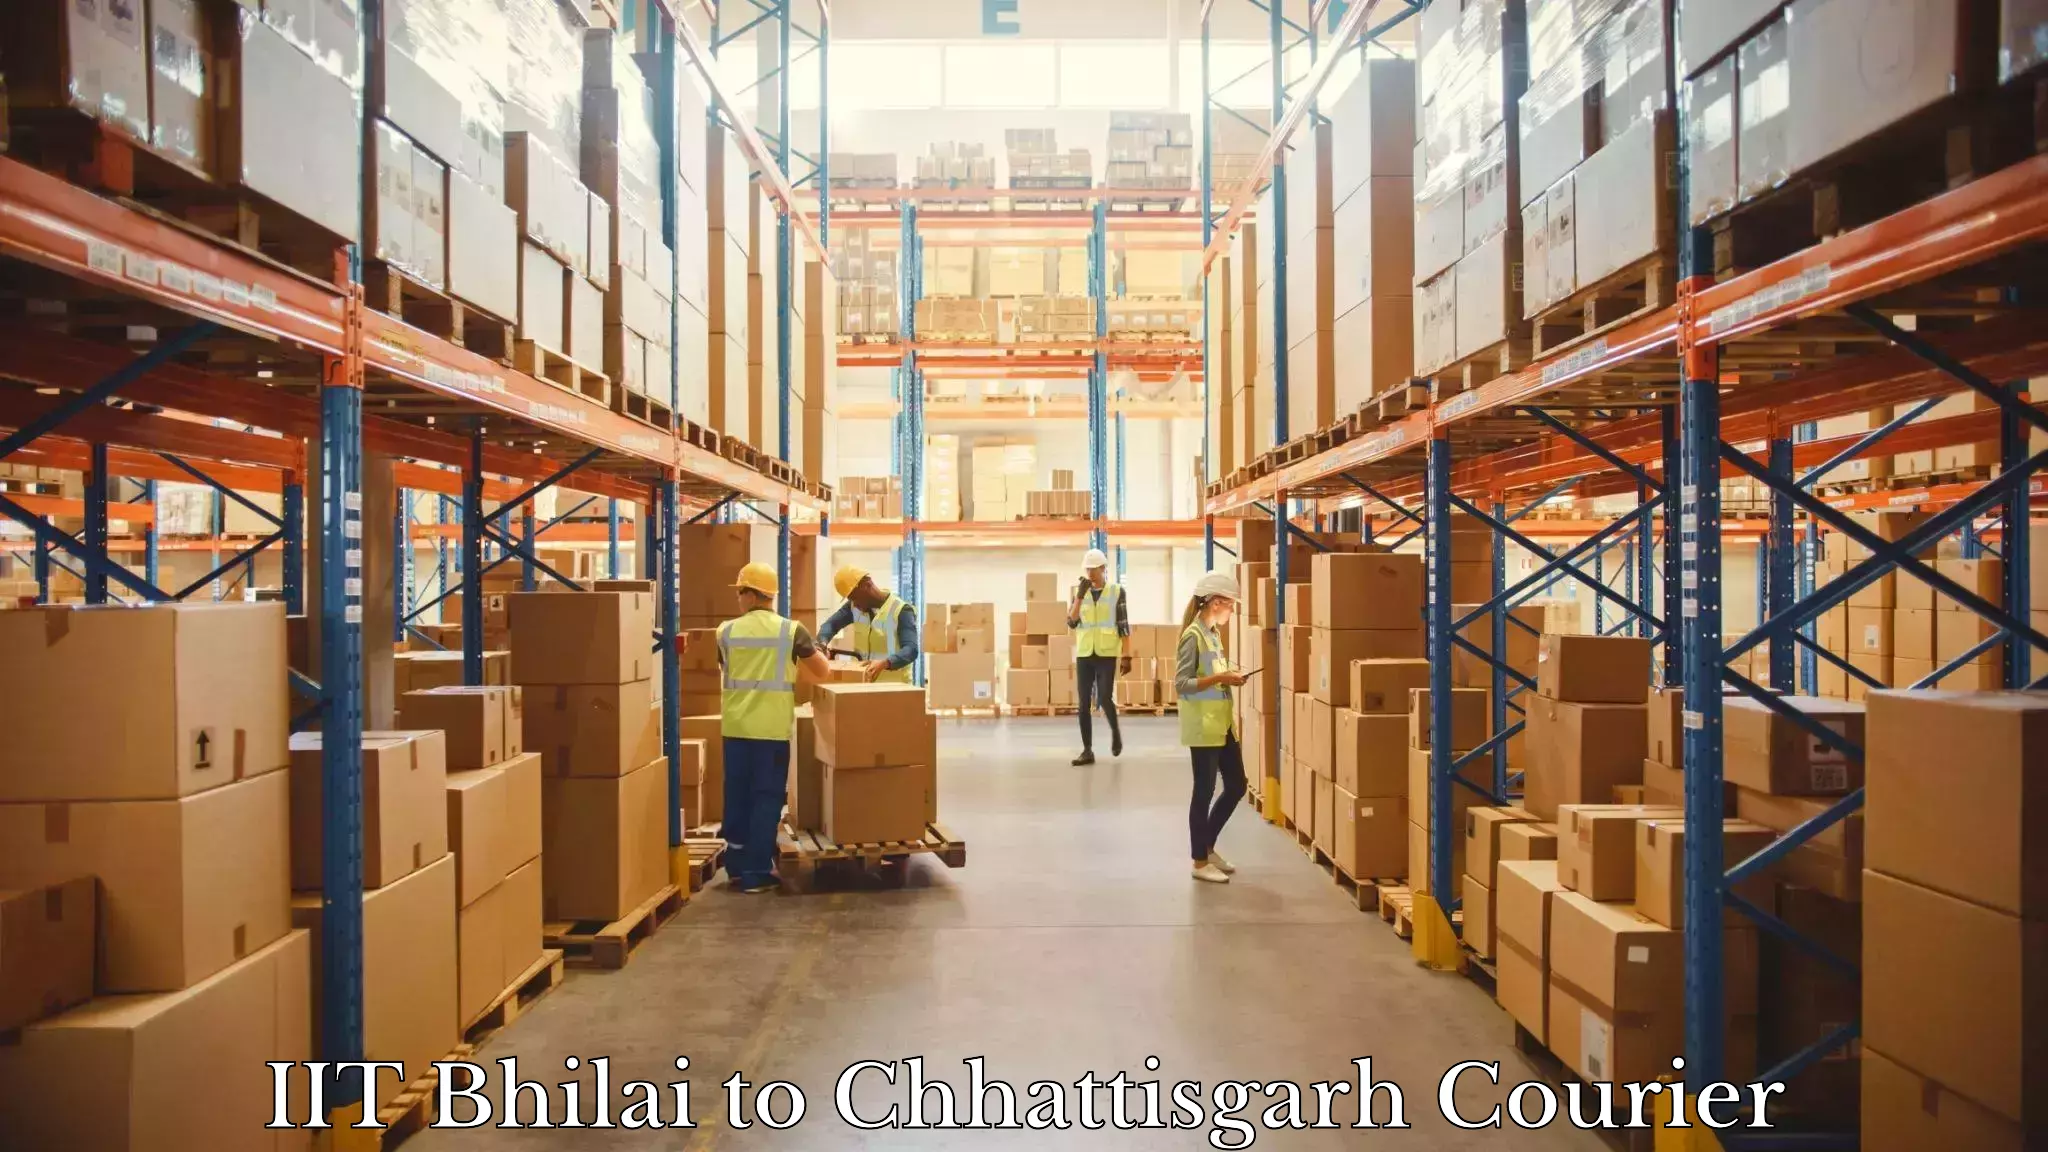 Express delivery capabilities in IIT Bhilai to Khairagarh